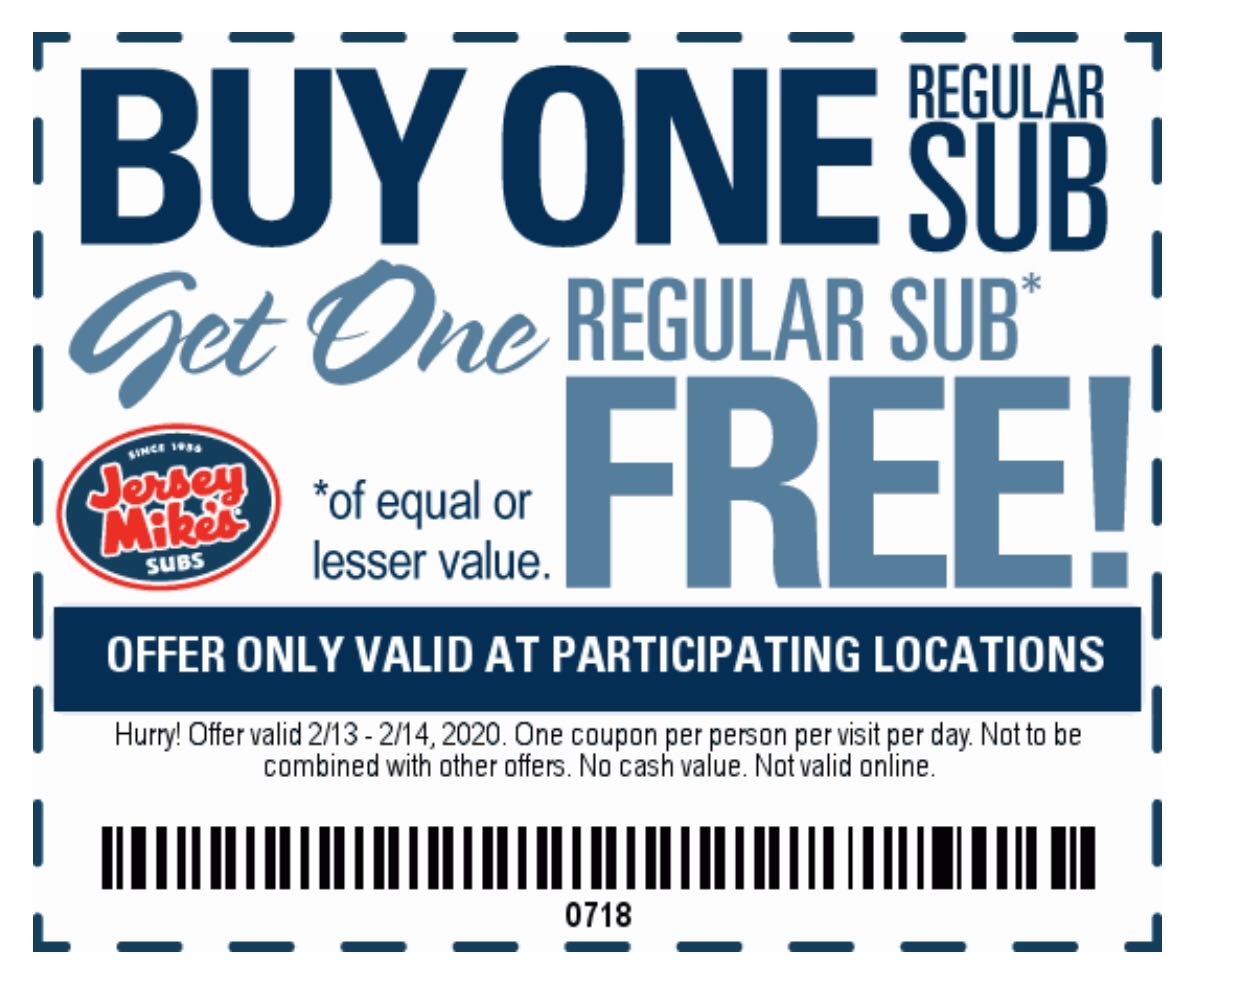 jersey mikes free sub code